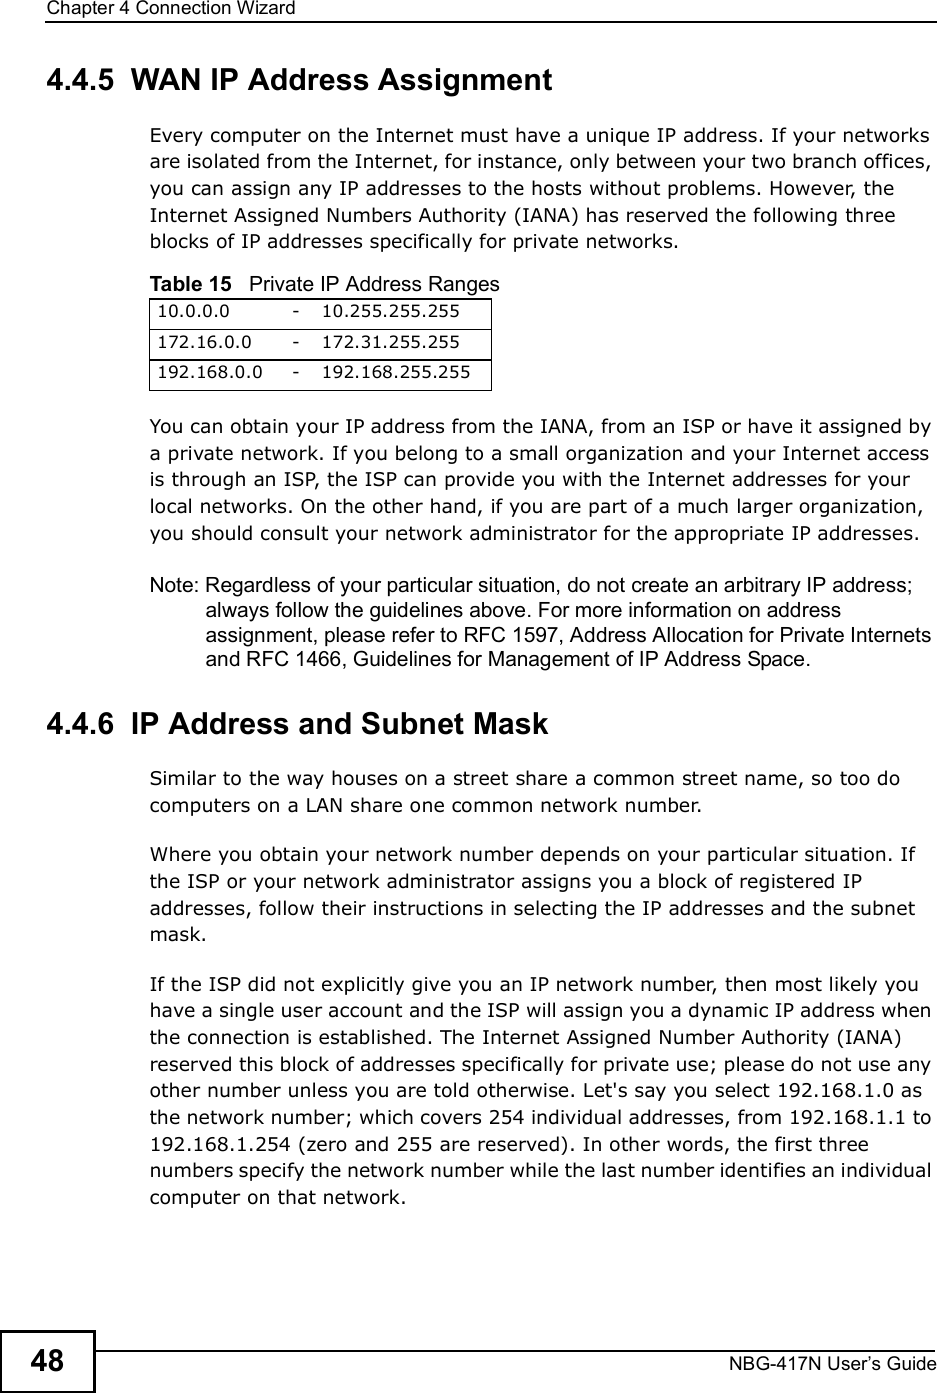 Chapter 4Connection WizardNBG-417N User s Guide484.4.5  WAN IP Address AssignmentEvery computer on the Internet must have a unique IP address. If your networks are isolated from the Internet, for instance, only between your two branch offices, you can assign any IP addresses to the hosts without problems. However, the Internet Assigned Numbers Authority (IANA) has reserved the following three blocks of IP addresses specifically for private networks.You can obtain your IP address from the IANA, from an ISP or have it assigned by a private network. If you belong to a small organization and your Internet access is through an ISP, the ISP can provide you with the Internet addresses for your local networks. On the other hand, if you are part of a much larger organization, you should consult your network administrator for the appropriate IP addresses.Note: Regardless of your particular situation, do not create an arbitrary IP address; always follow the guidelines above. For more information on address assignment, please refer to RFC 1597, Address Allocation for Private Internets and RFC 1466, Guidelines for Management of IP Address Space.4.4.6  IP Address and Subnet MaskSimilar to the way houses on a street share a common street name, so too do computers on a LAN share one common network number.Where you obtain your network number depends on your particular situation. If the ISP or your network administrator assigns you a block of registered IP addresses, follow their instructions in selecting the IP addresses and the subnet mask.If the ISP did not explicitly give you an IP network number, then most likely you have a single user account and the ISP will assign you a dynamic IP address when the connection is established. The Internet Assigned Number Authority (IANA) reserved this block of addresses specifically for private use; please do not use any other number unless you are told otherwise. Let&apos;s say you select 192.168.1.0 as the network number; which covers 254 individual addresses, from 192.168.1.1 to 192.168.1.254 (zero and 255 are reserved). In other words, the first three numbers specify the network number while the last number identifies an individual computer on that network.Table 15   Private IP Address Ranges10.0.0.0 - 10.255.255.255172.16.0.0 - 172.31.255.255192.168.0.0 - 192.168.255.255